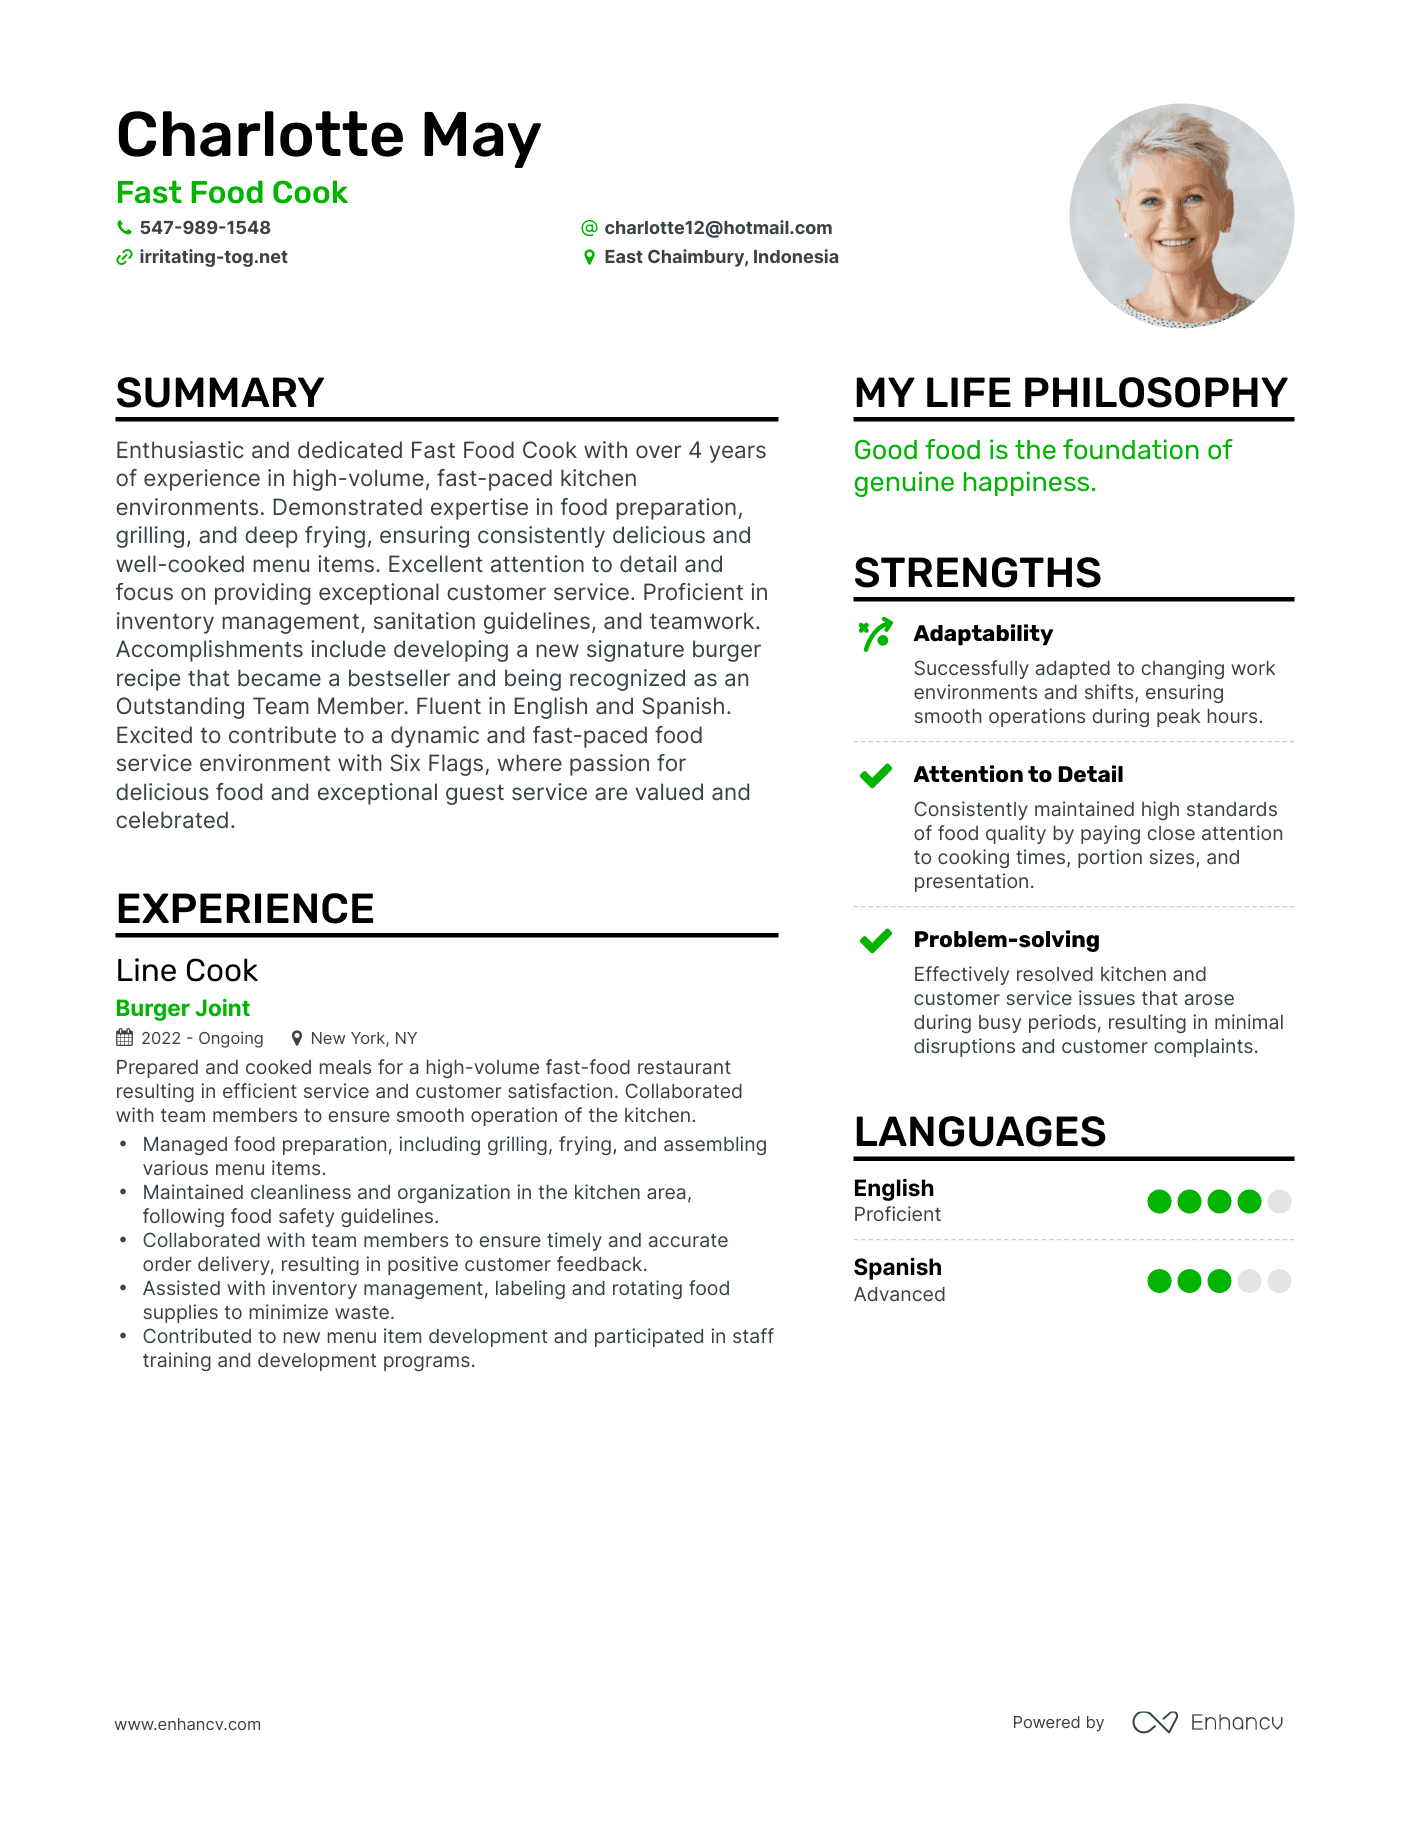 Fast Food Cook resume example